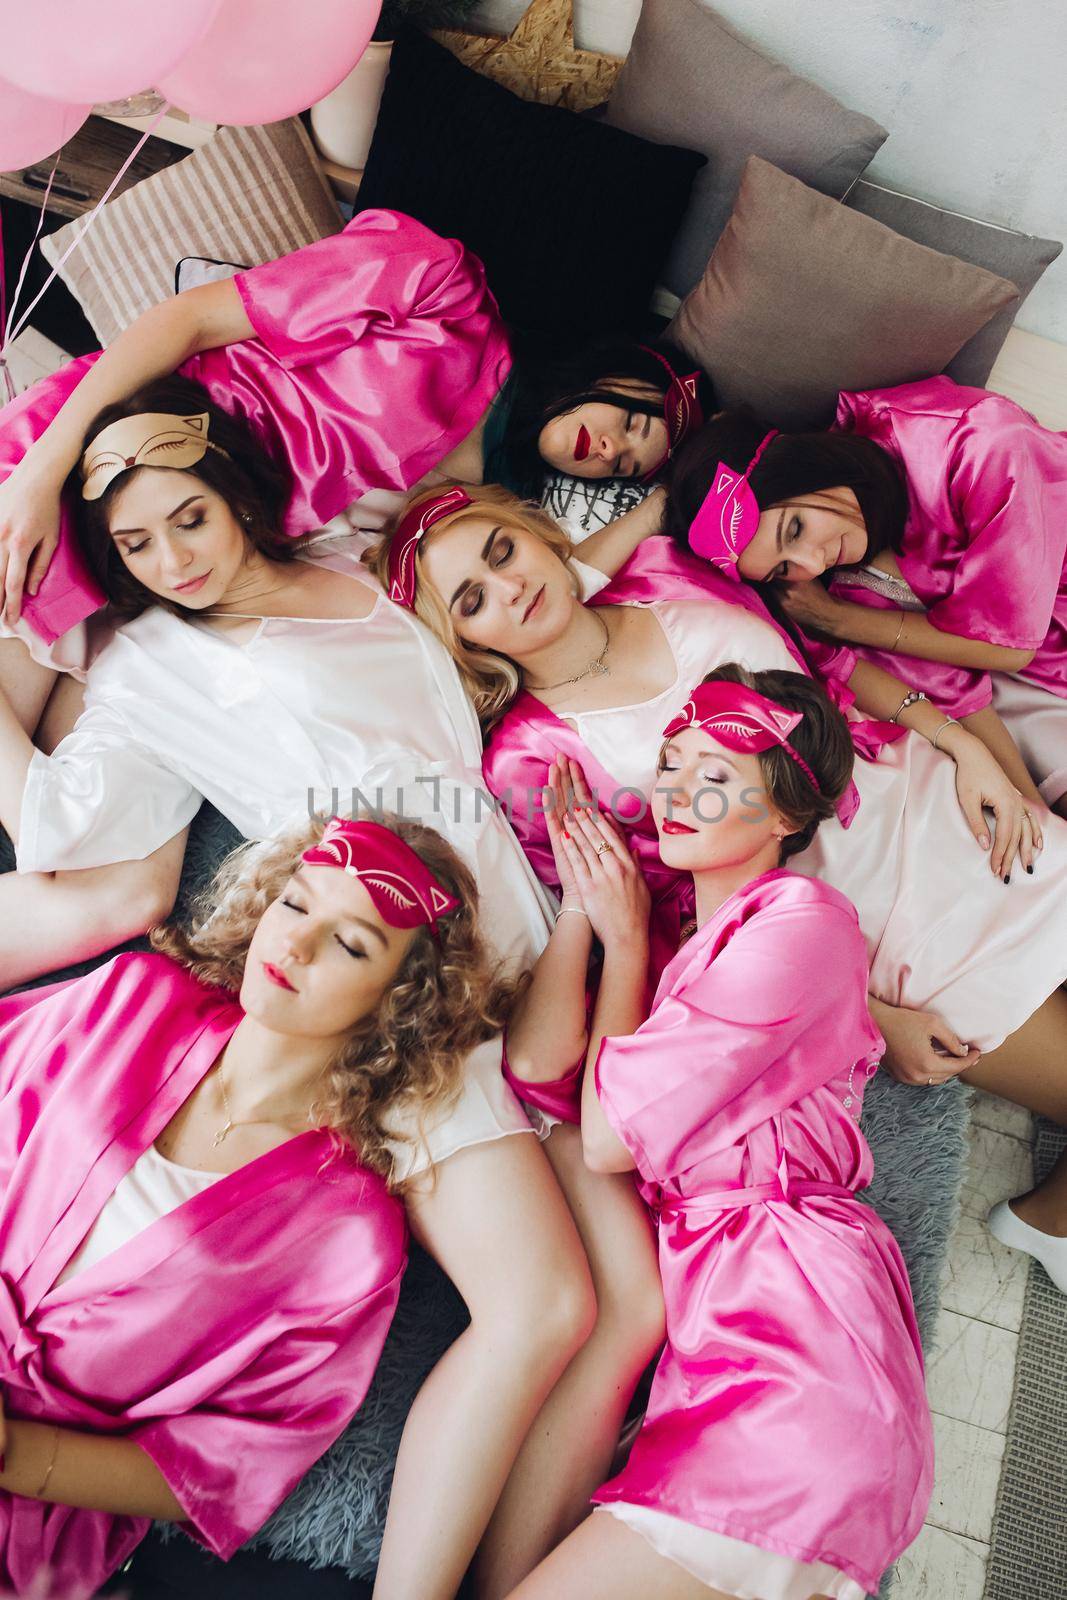 Overhead of pretty young ladies in pink bathrobes lying on bed with bride-to-be in white dress. Girlfriends showing tongues out and smiling. Bachelorette party.